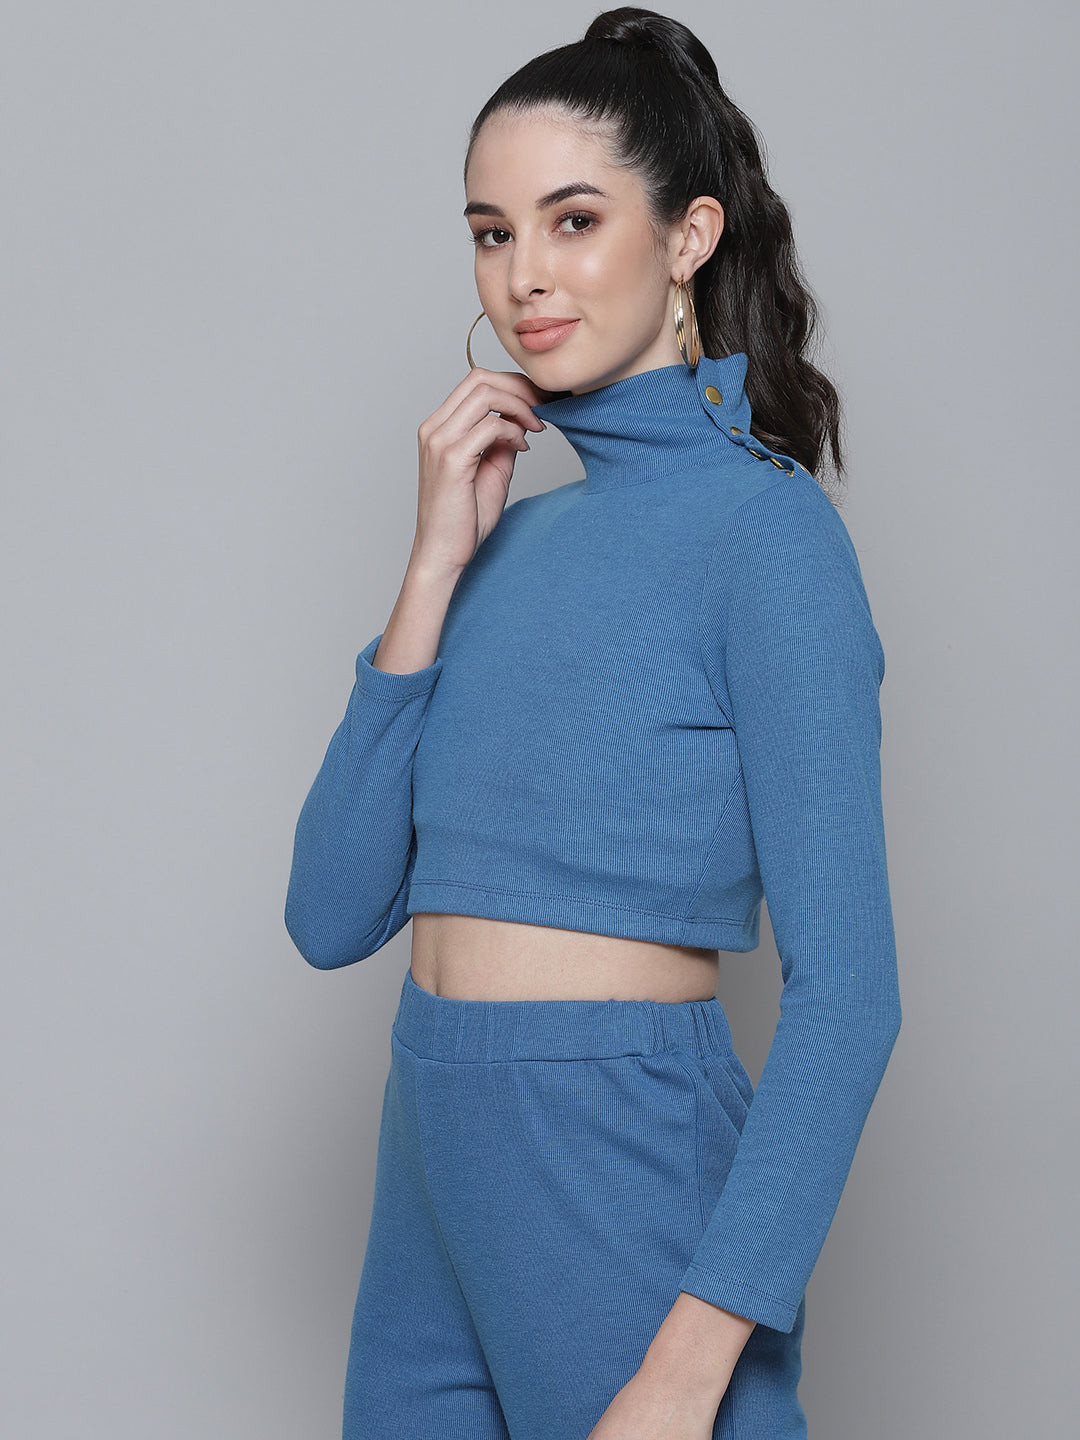 Blue Rib Turtle Buttoned Neck Crop Top